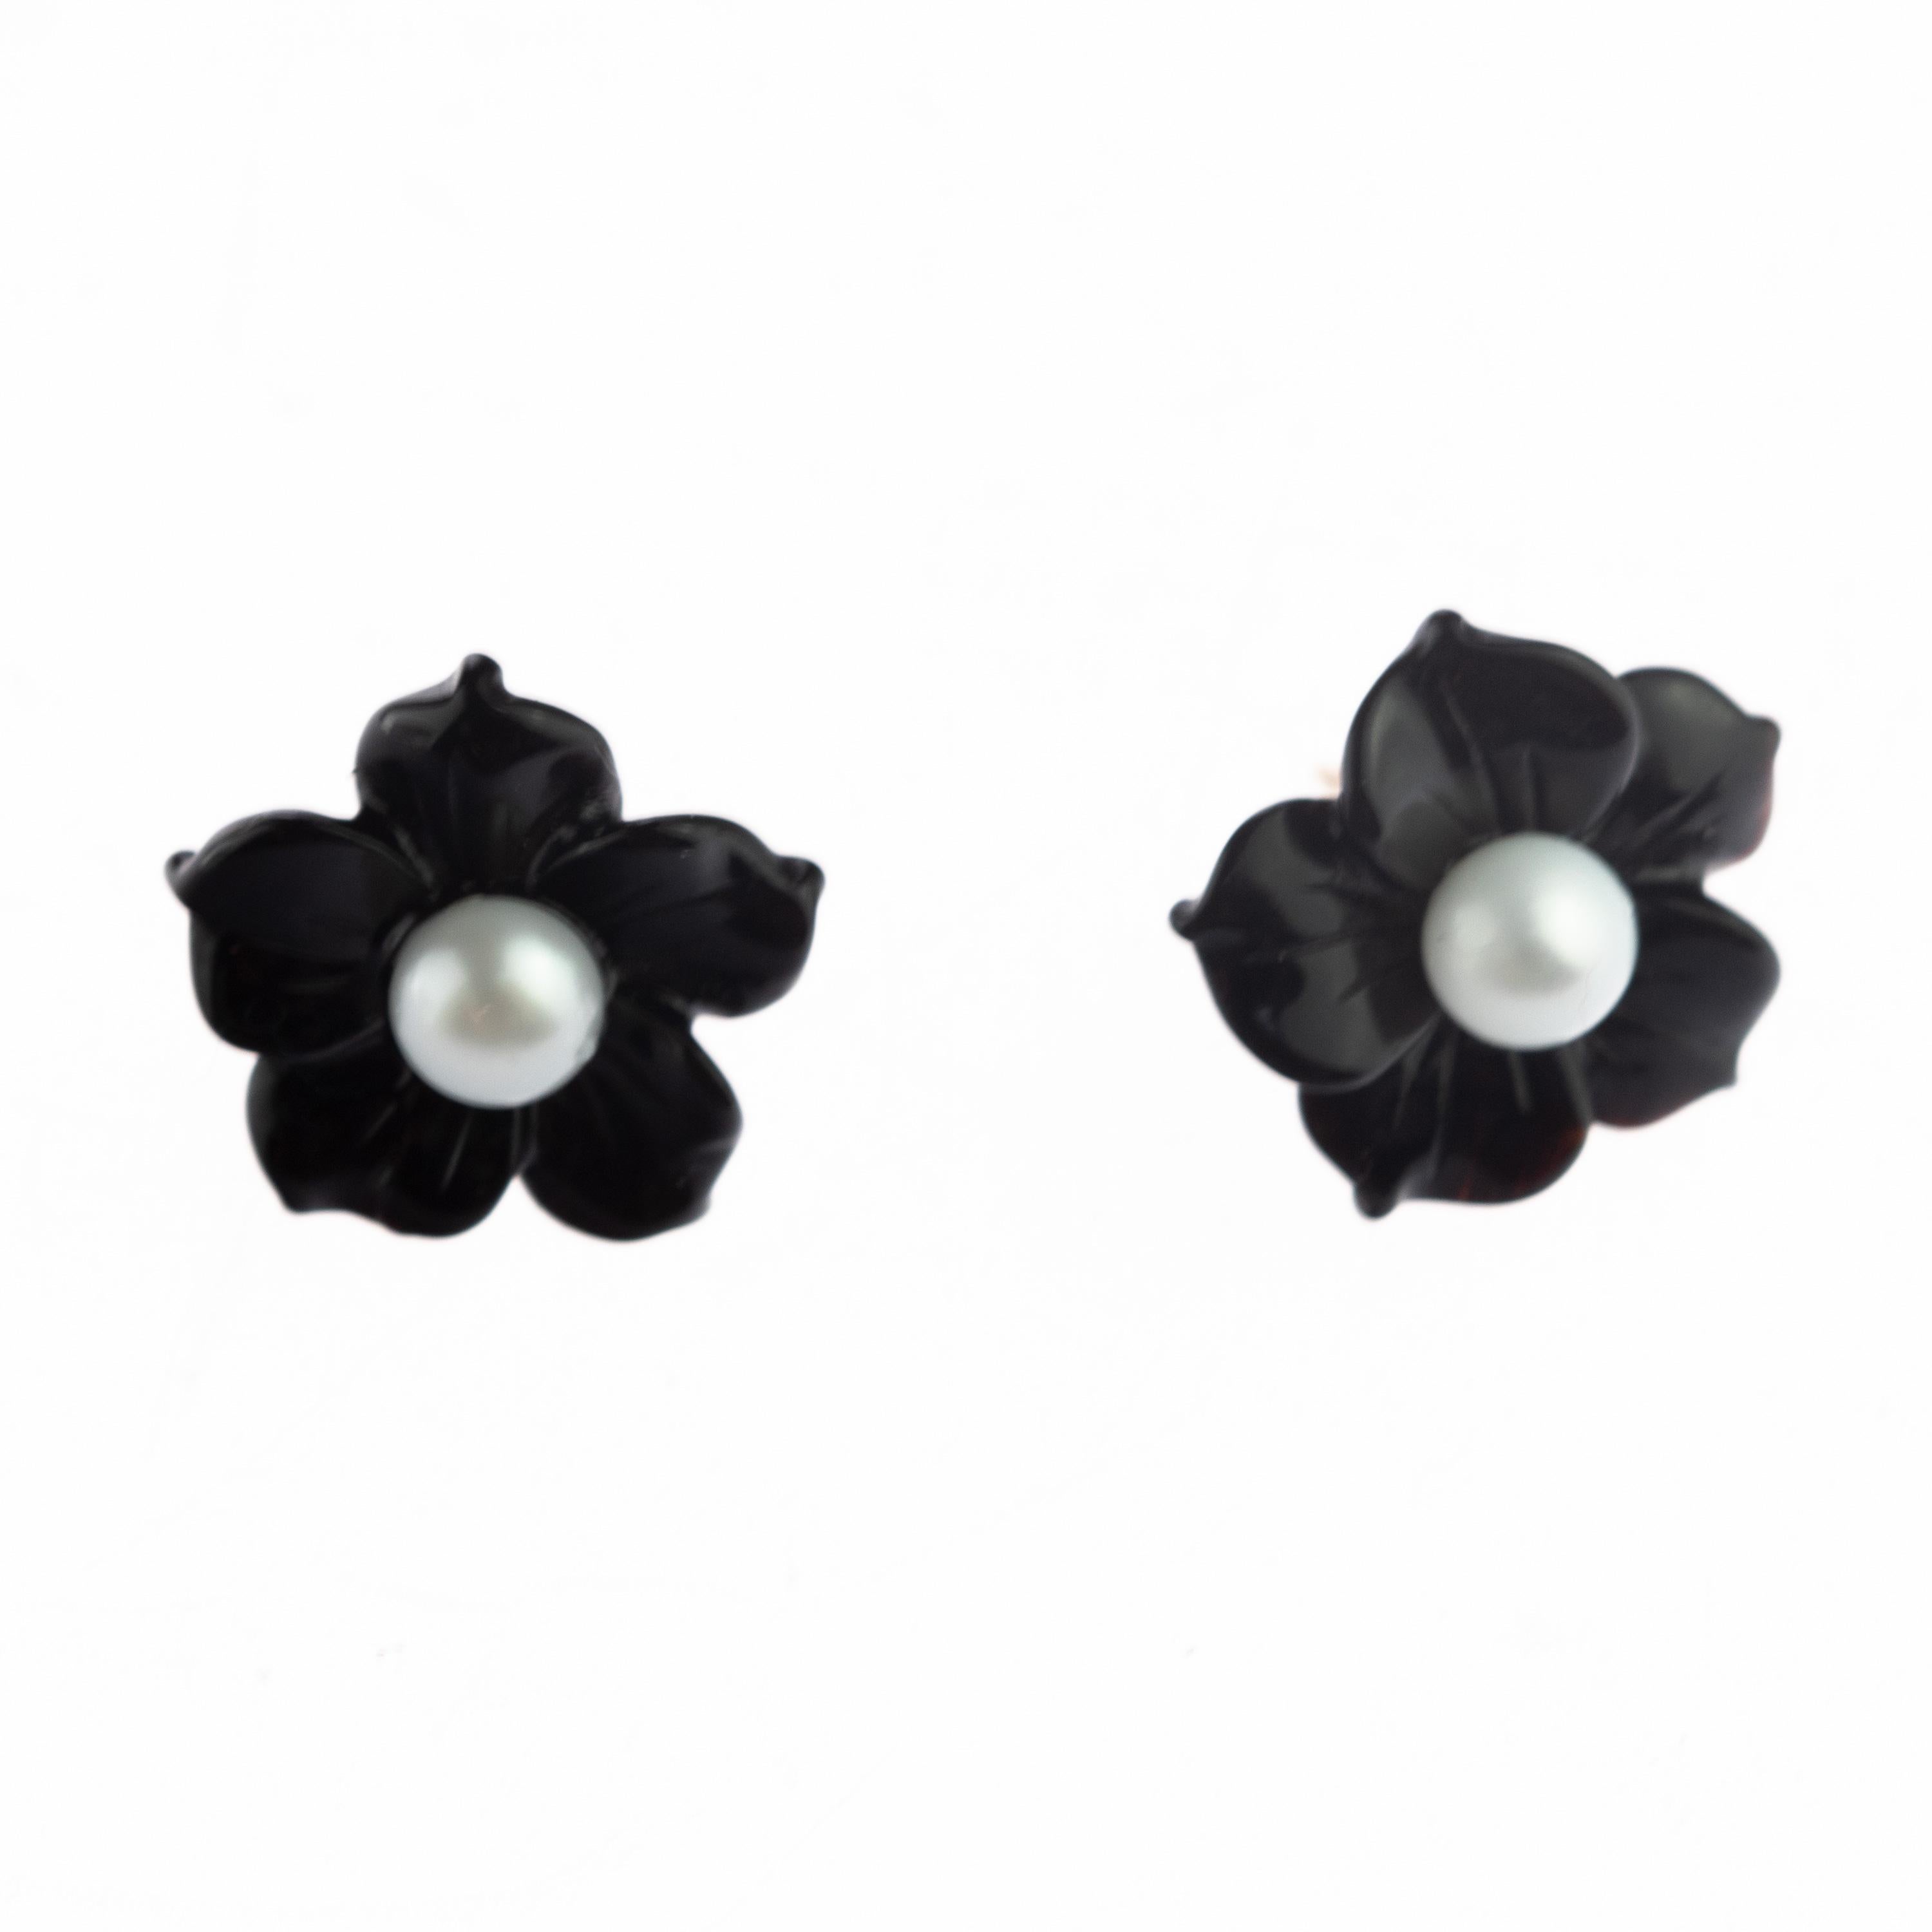 Astonishing and delicate 4 carat black agate flower stud earrings with a 5 mm freshwater pearl inside. Carved petals that evoke the italian handmade traditional jewelry work, wrapping itself in a soft look enriched with filled gold manifesting